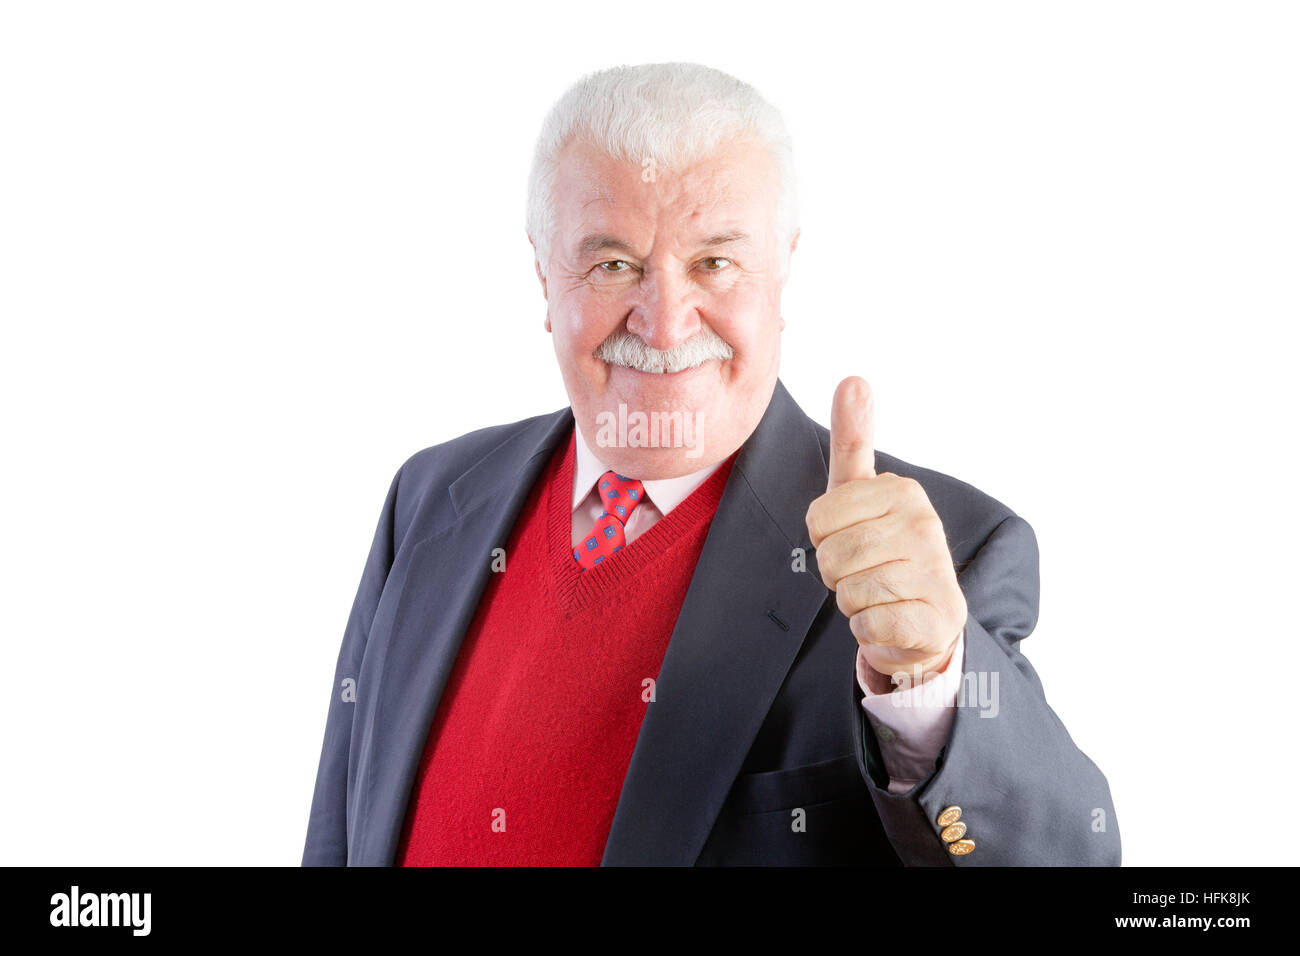 Cheeky senior gives a thumbs up and smiles at the camera while wearing a business suit Stock Photo